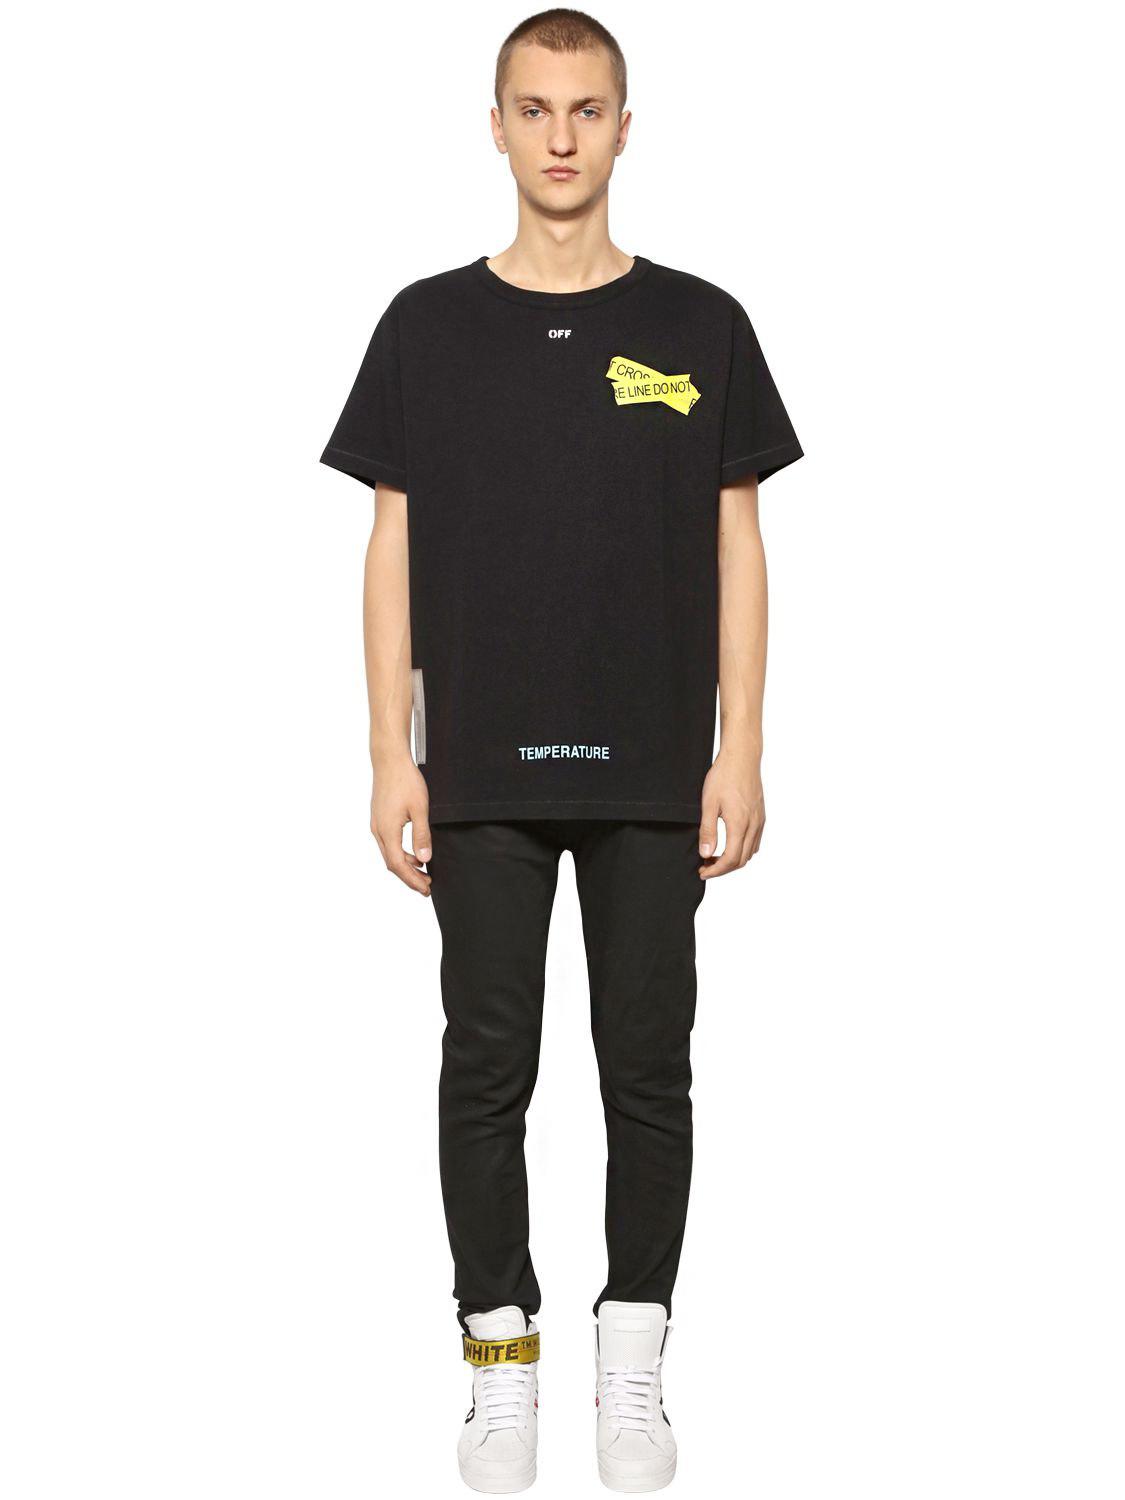 Off-White c/o Virgil Abloh Oversize Fire Line Tape Jersey T-shirt in ...